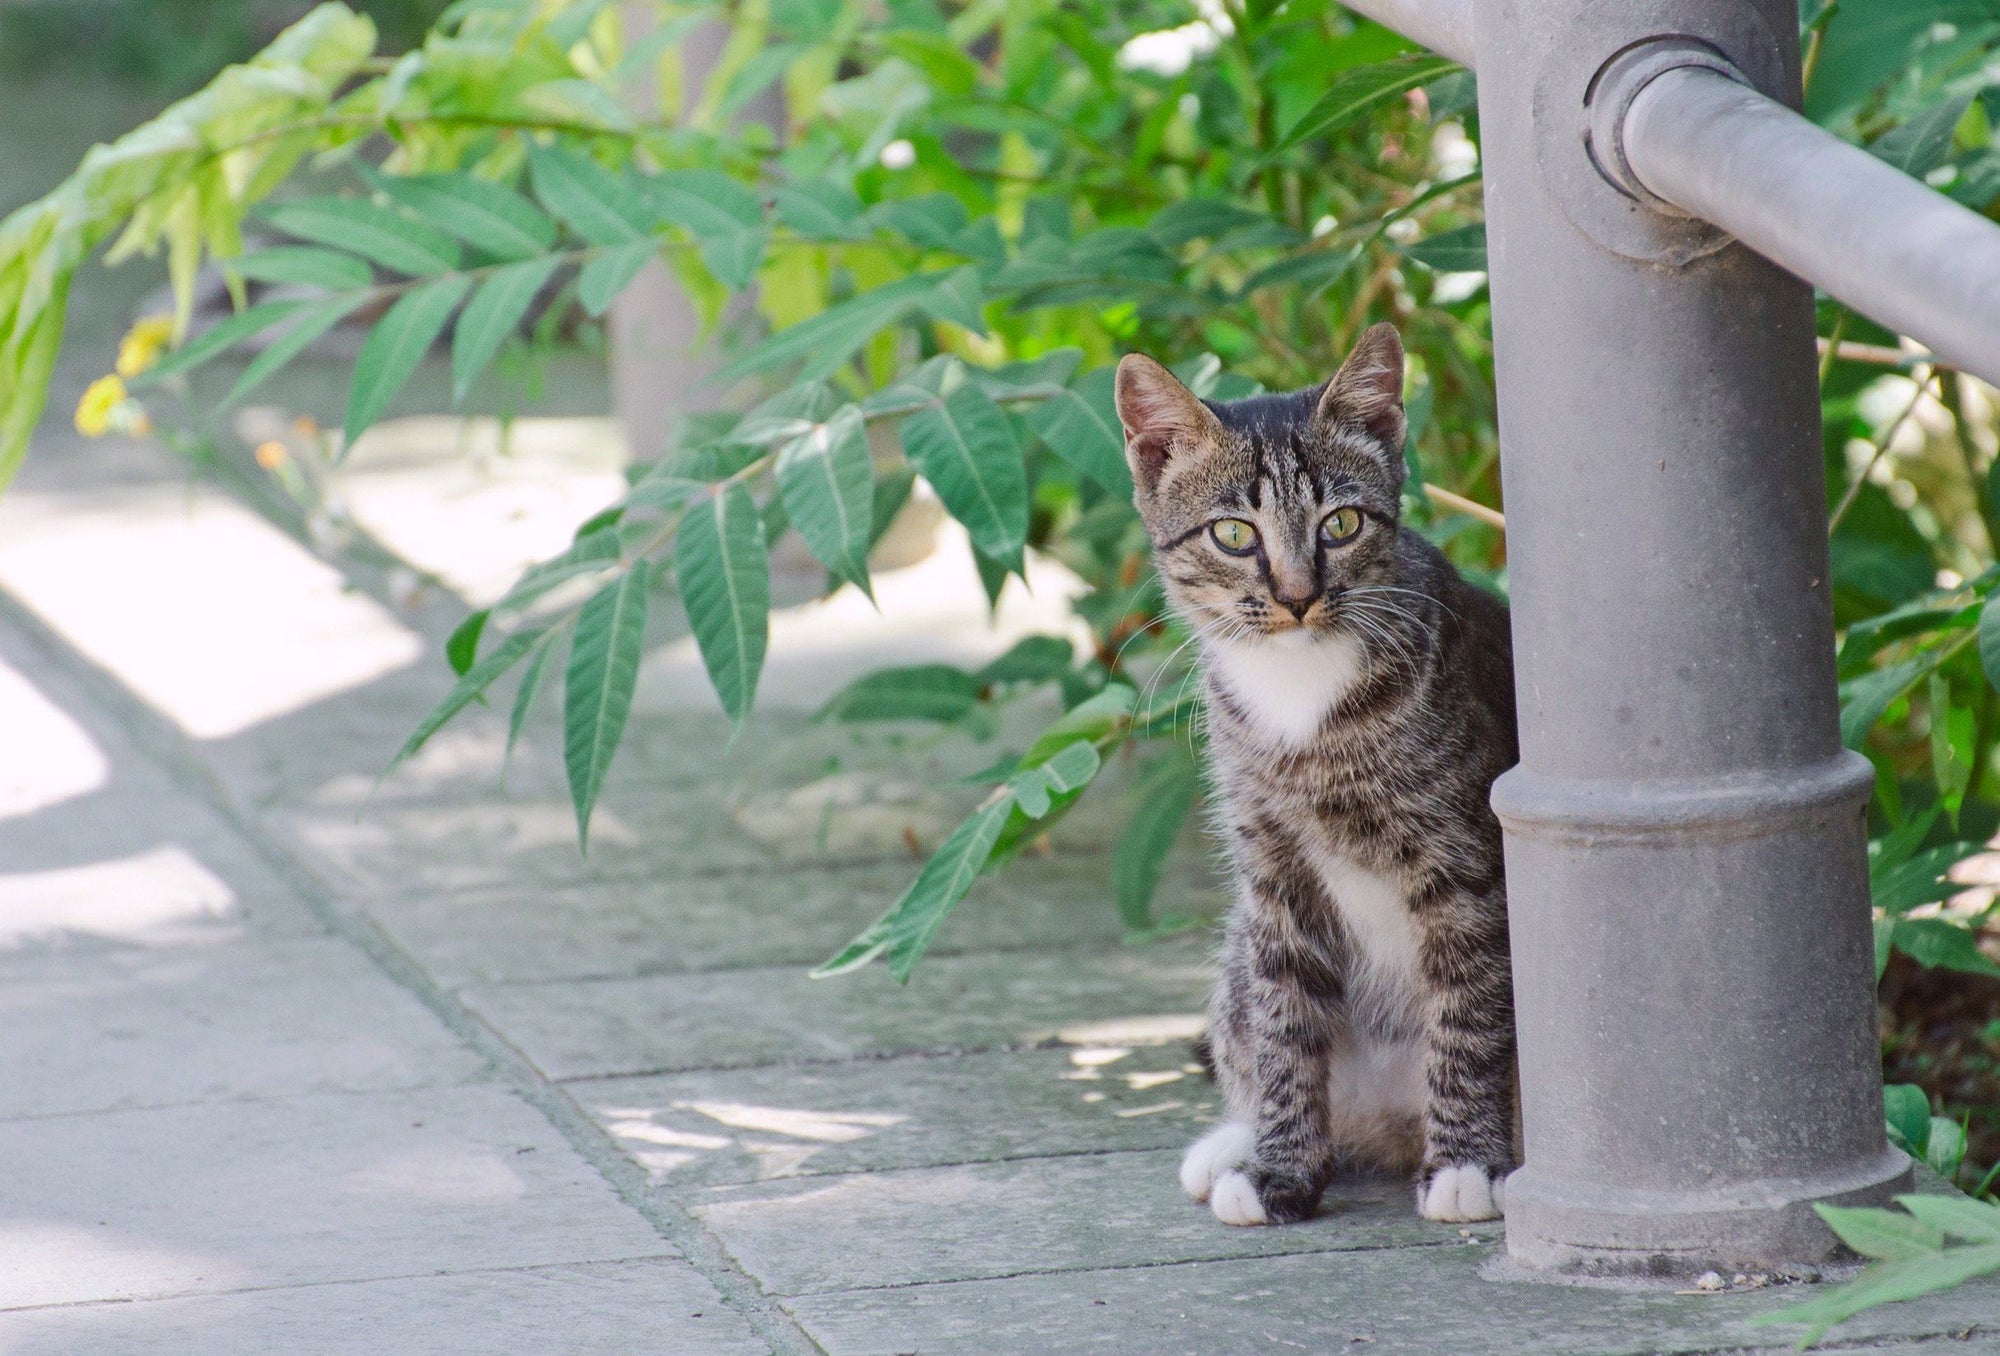 How to Humanely Deal with Feral Cats